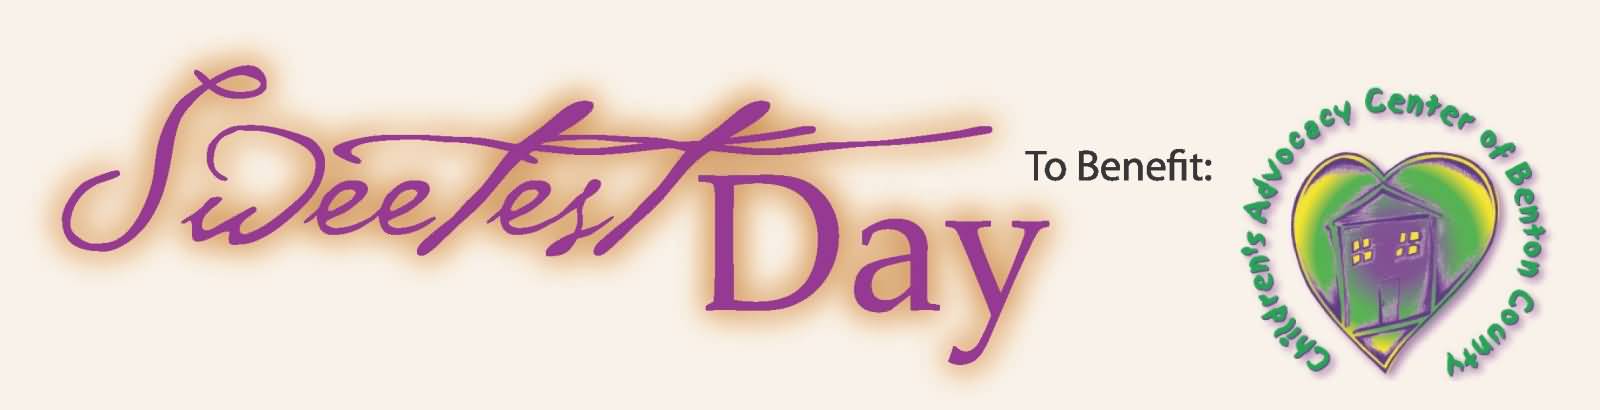 Sweetest Day Wishes Header Image